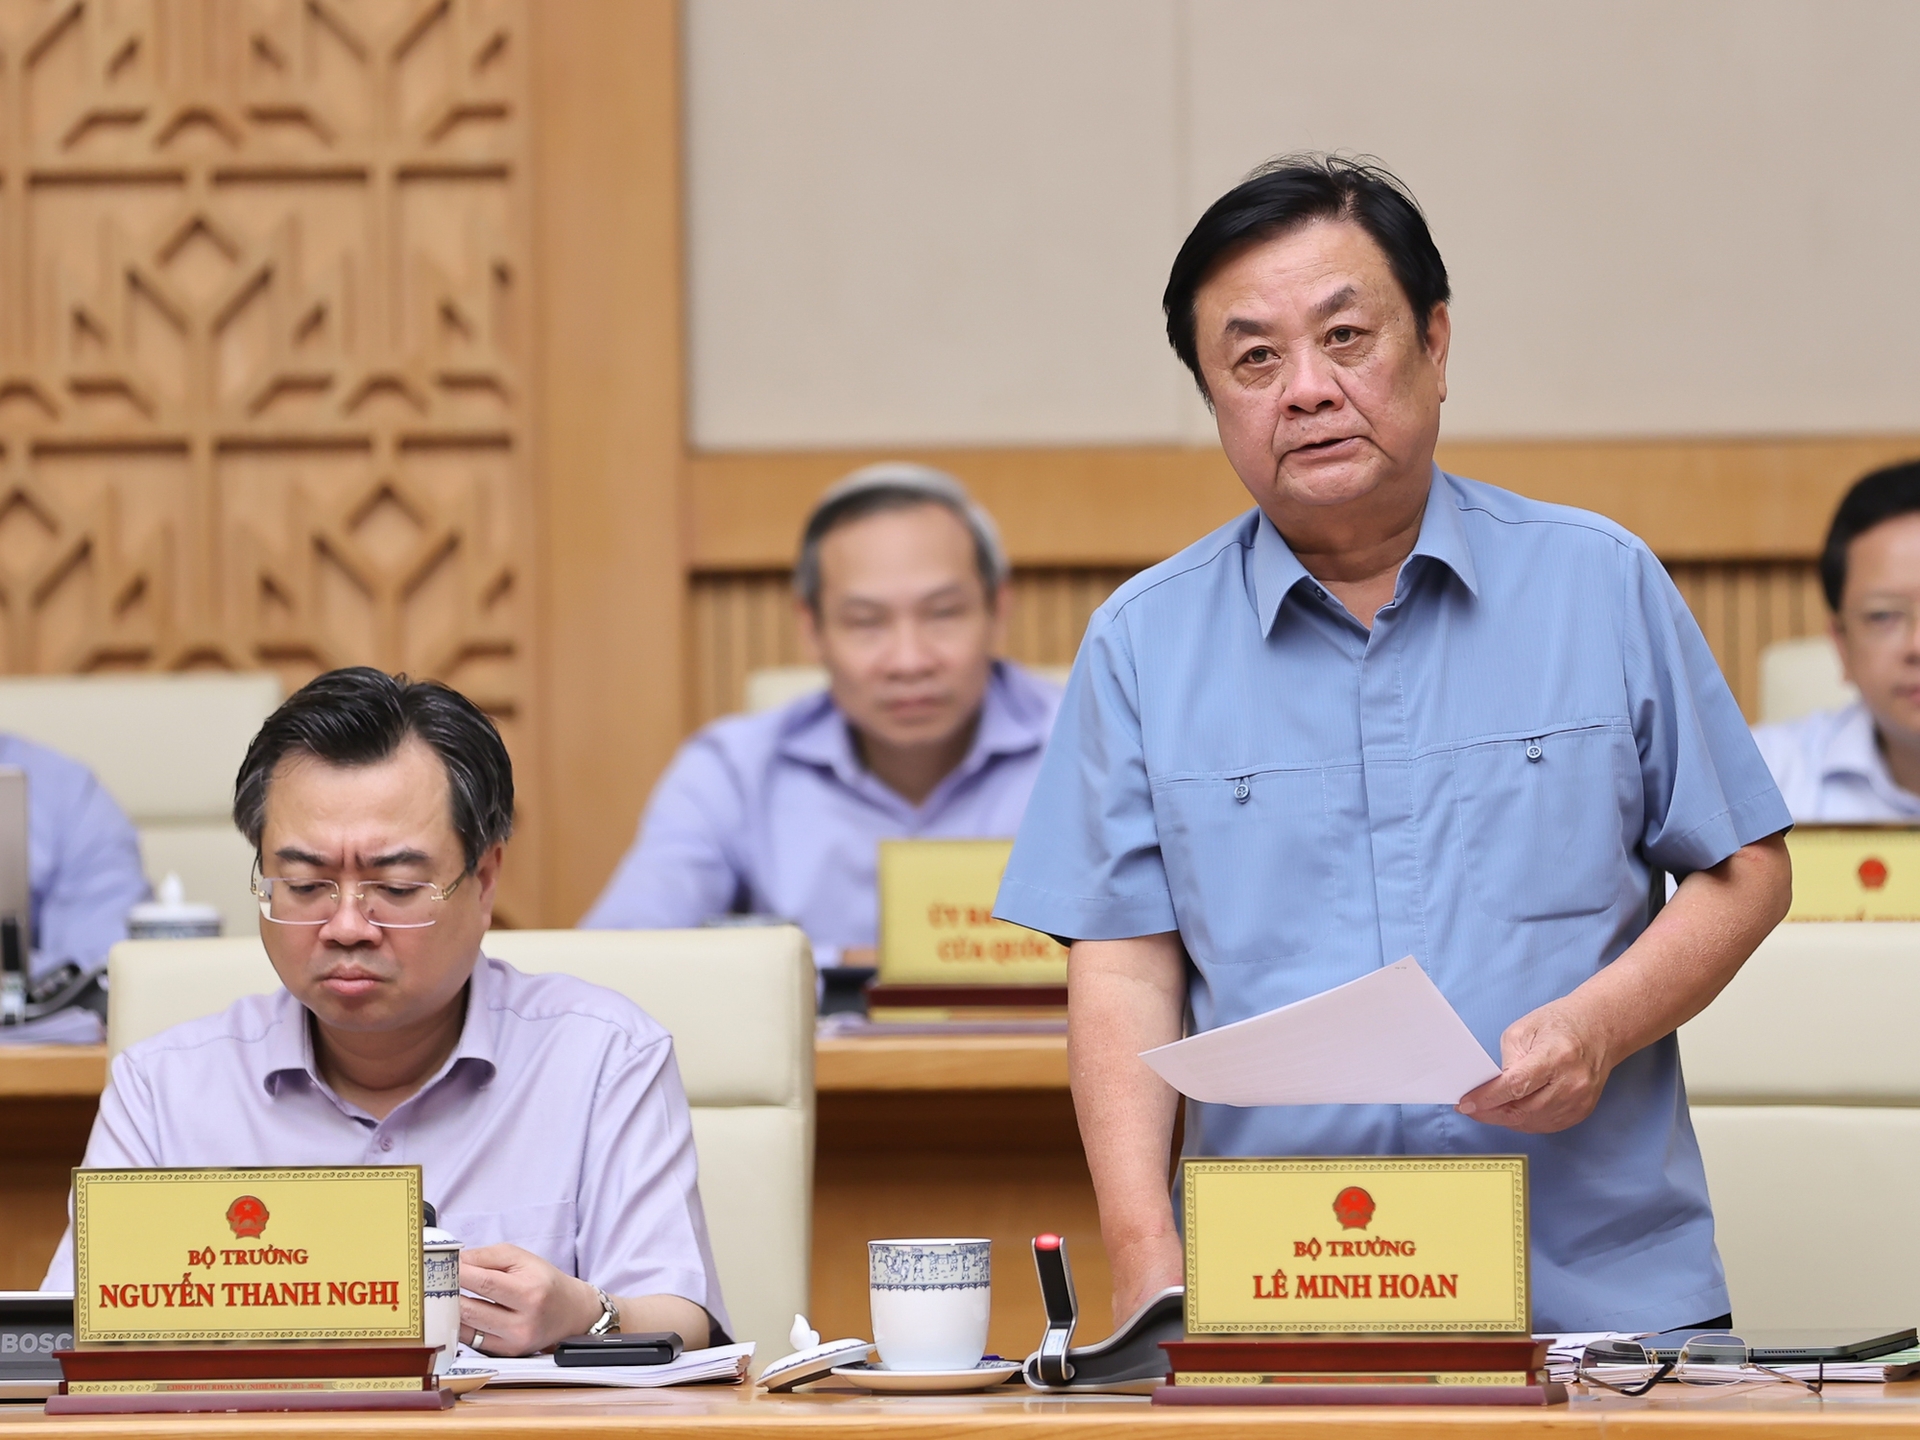 Minister of Agriculture and Rural Development Le Minh Hoan spoke at the meeting. Photo: VGP/Nhat Bac.